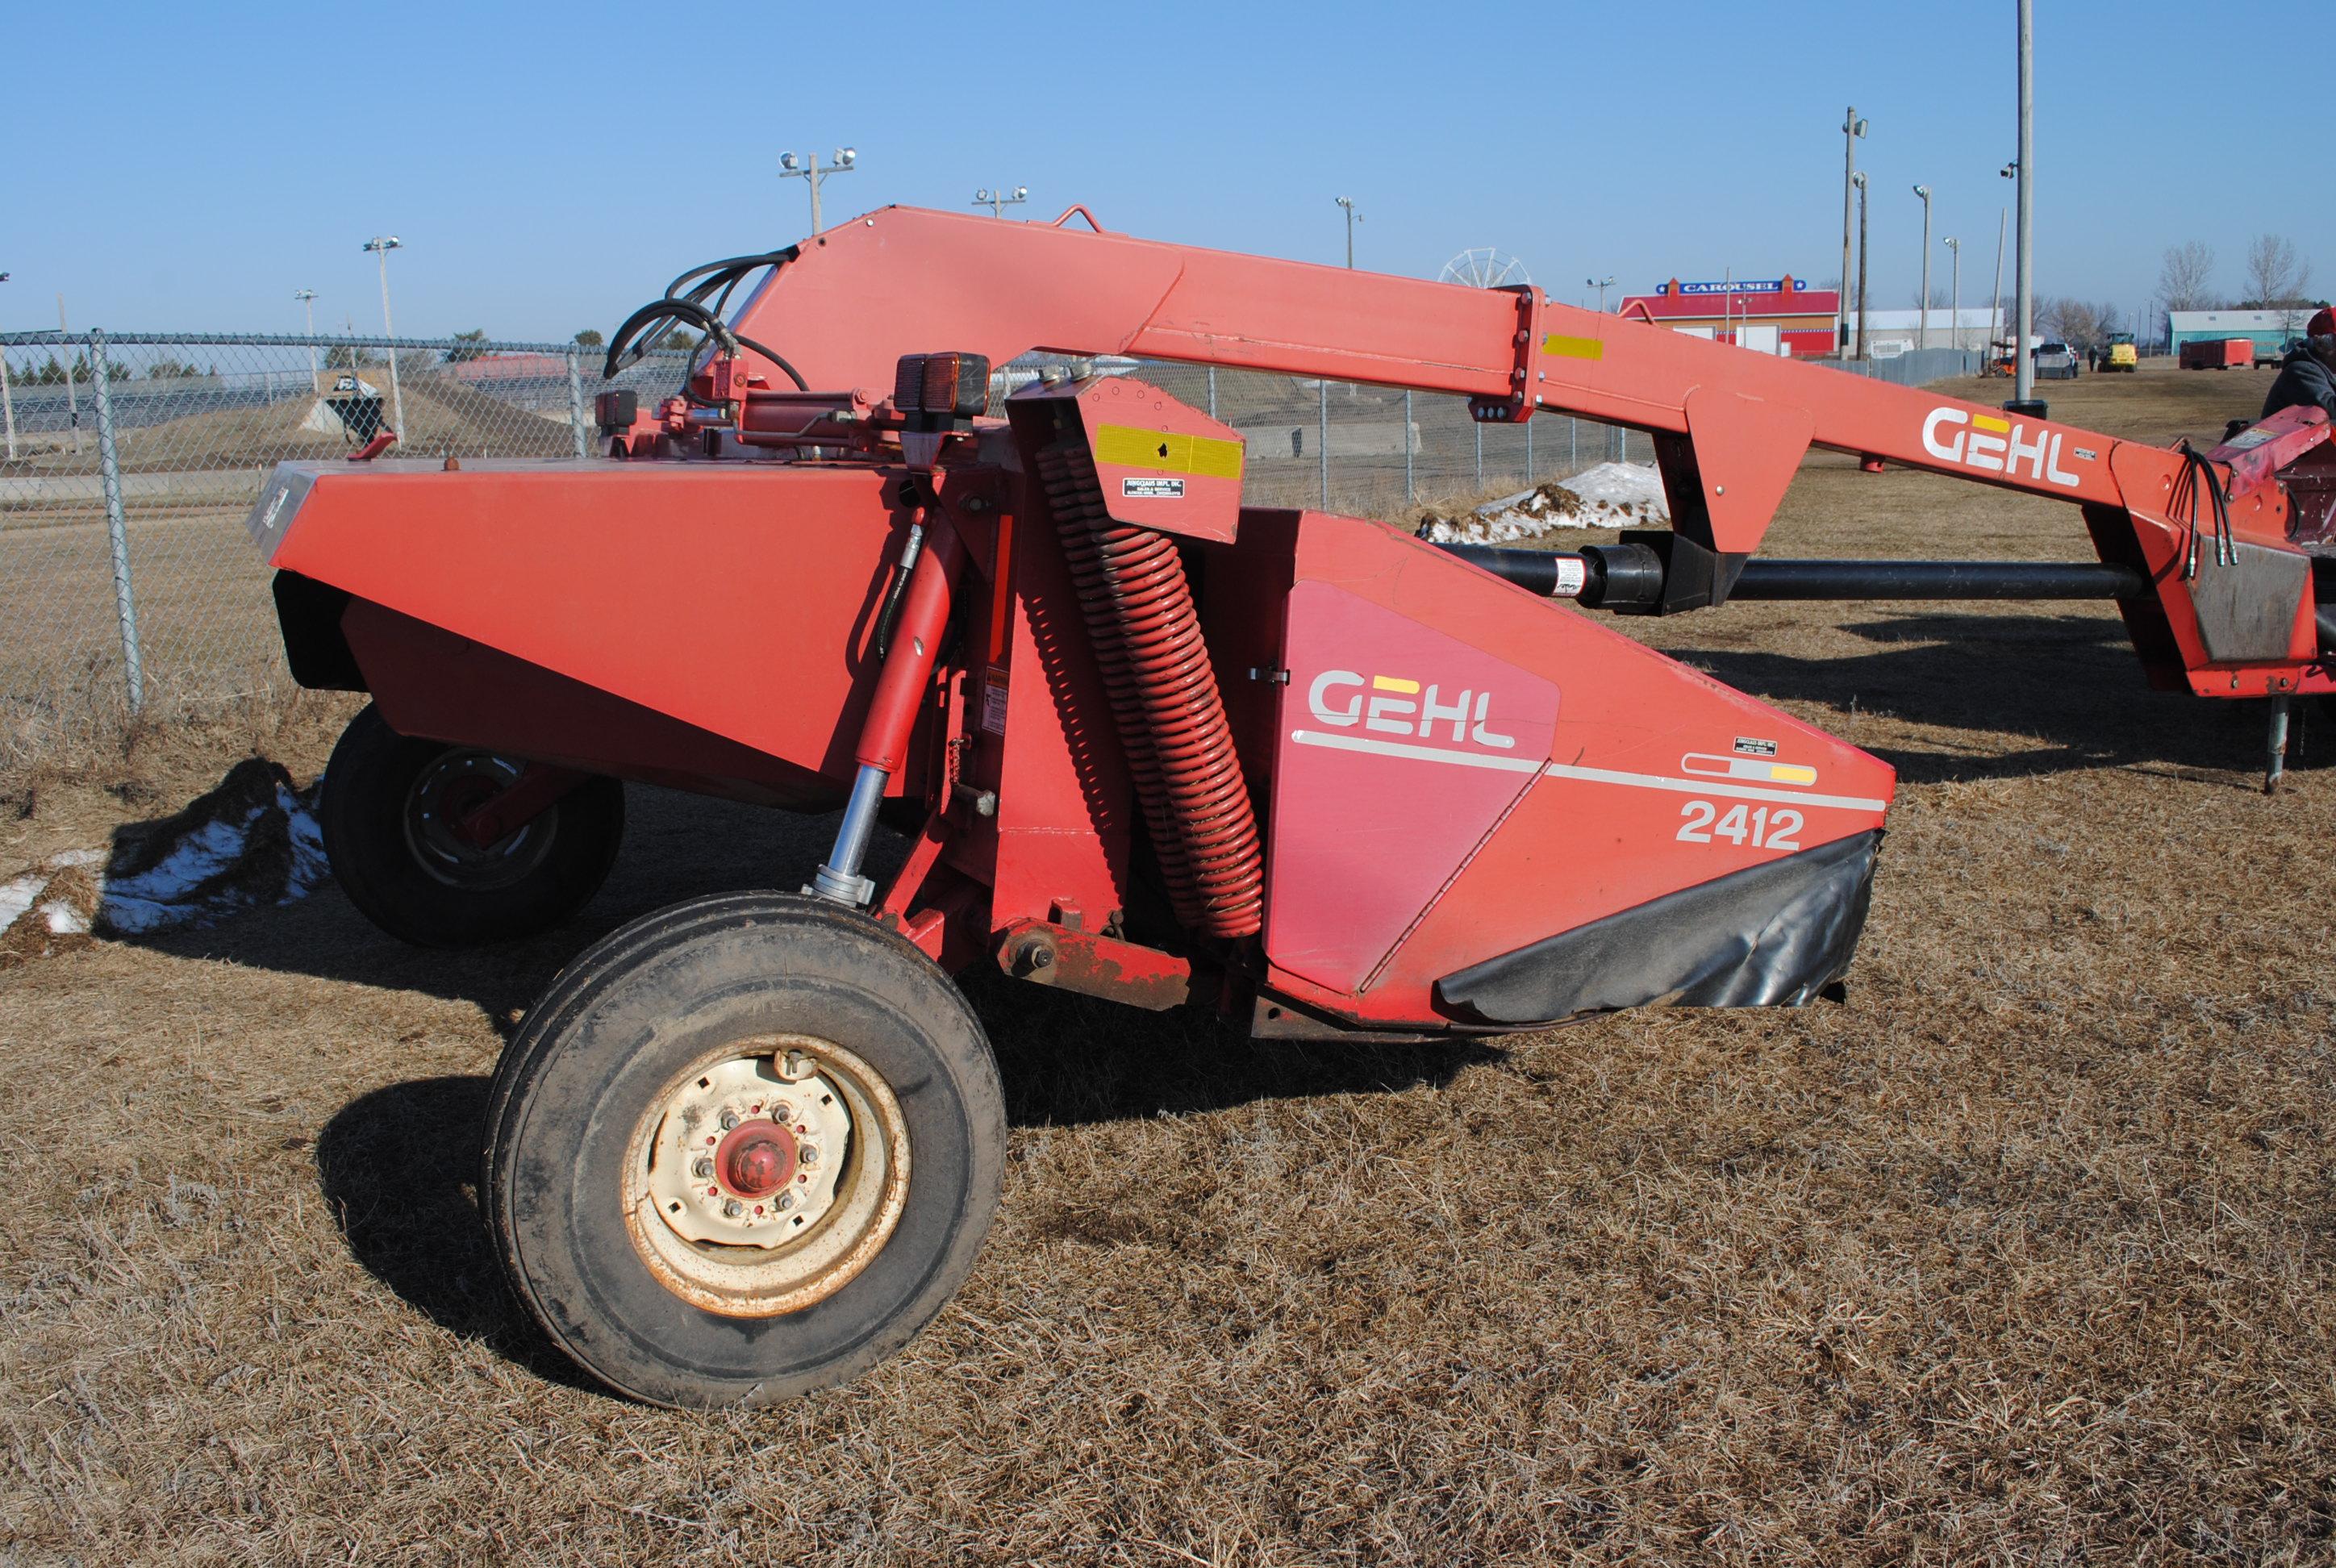 Gehl 2412 HydroSwing Disc Bine, rubber rollers, new knives, pto in office, good-running condition